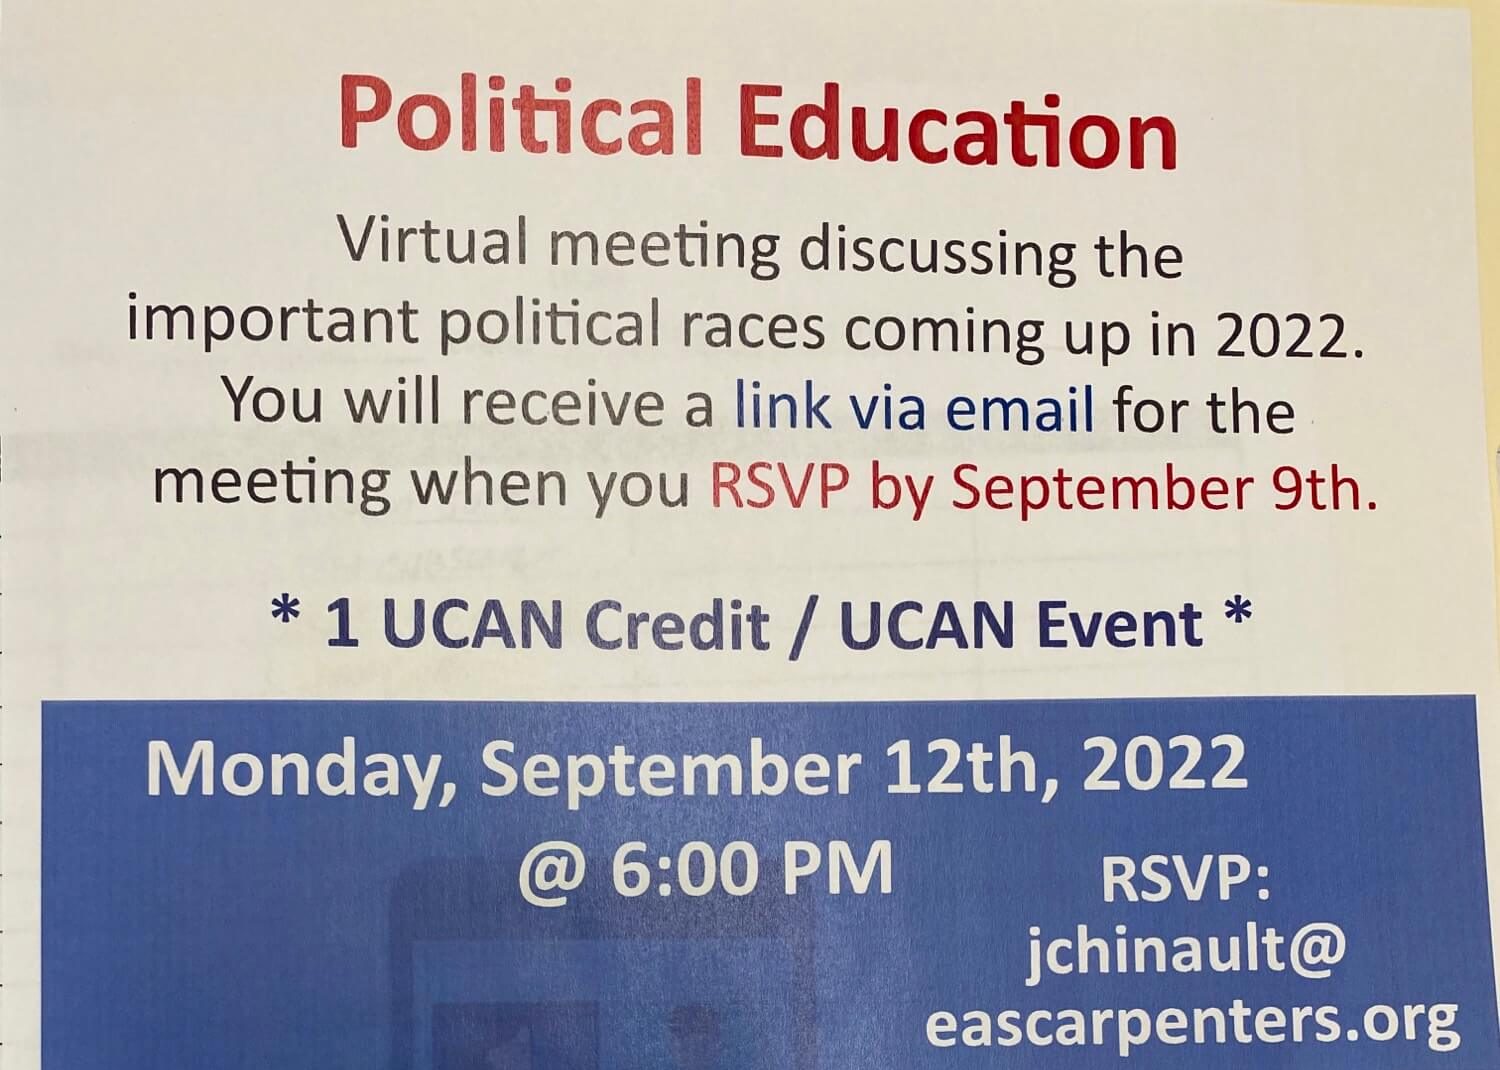 Political Education Meeting